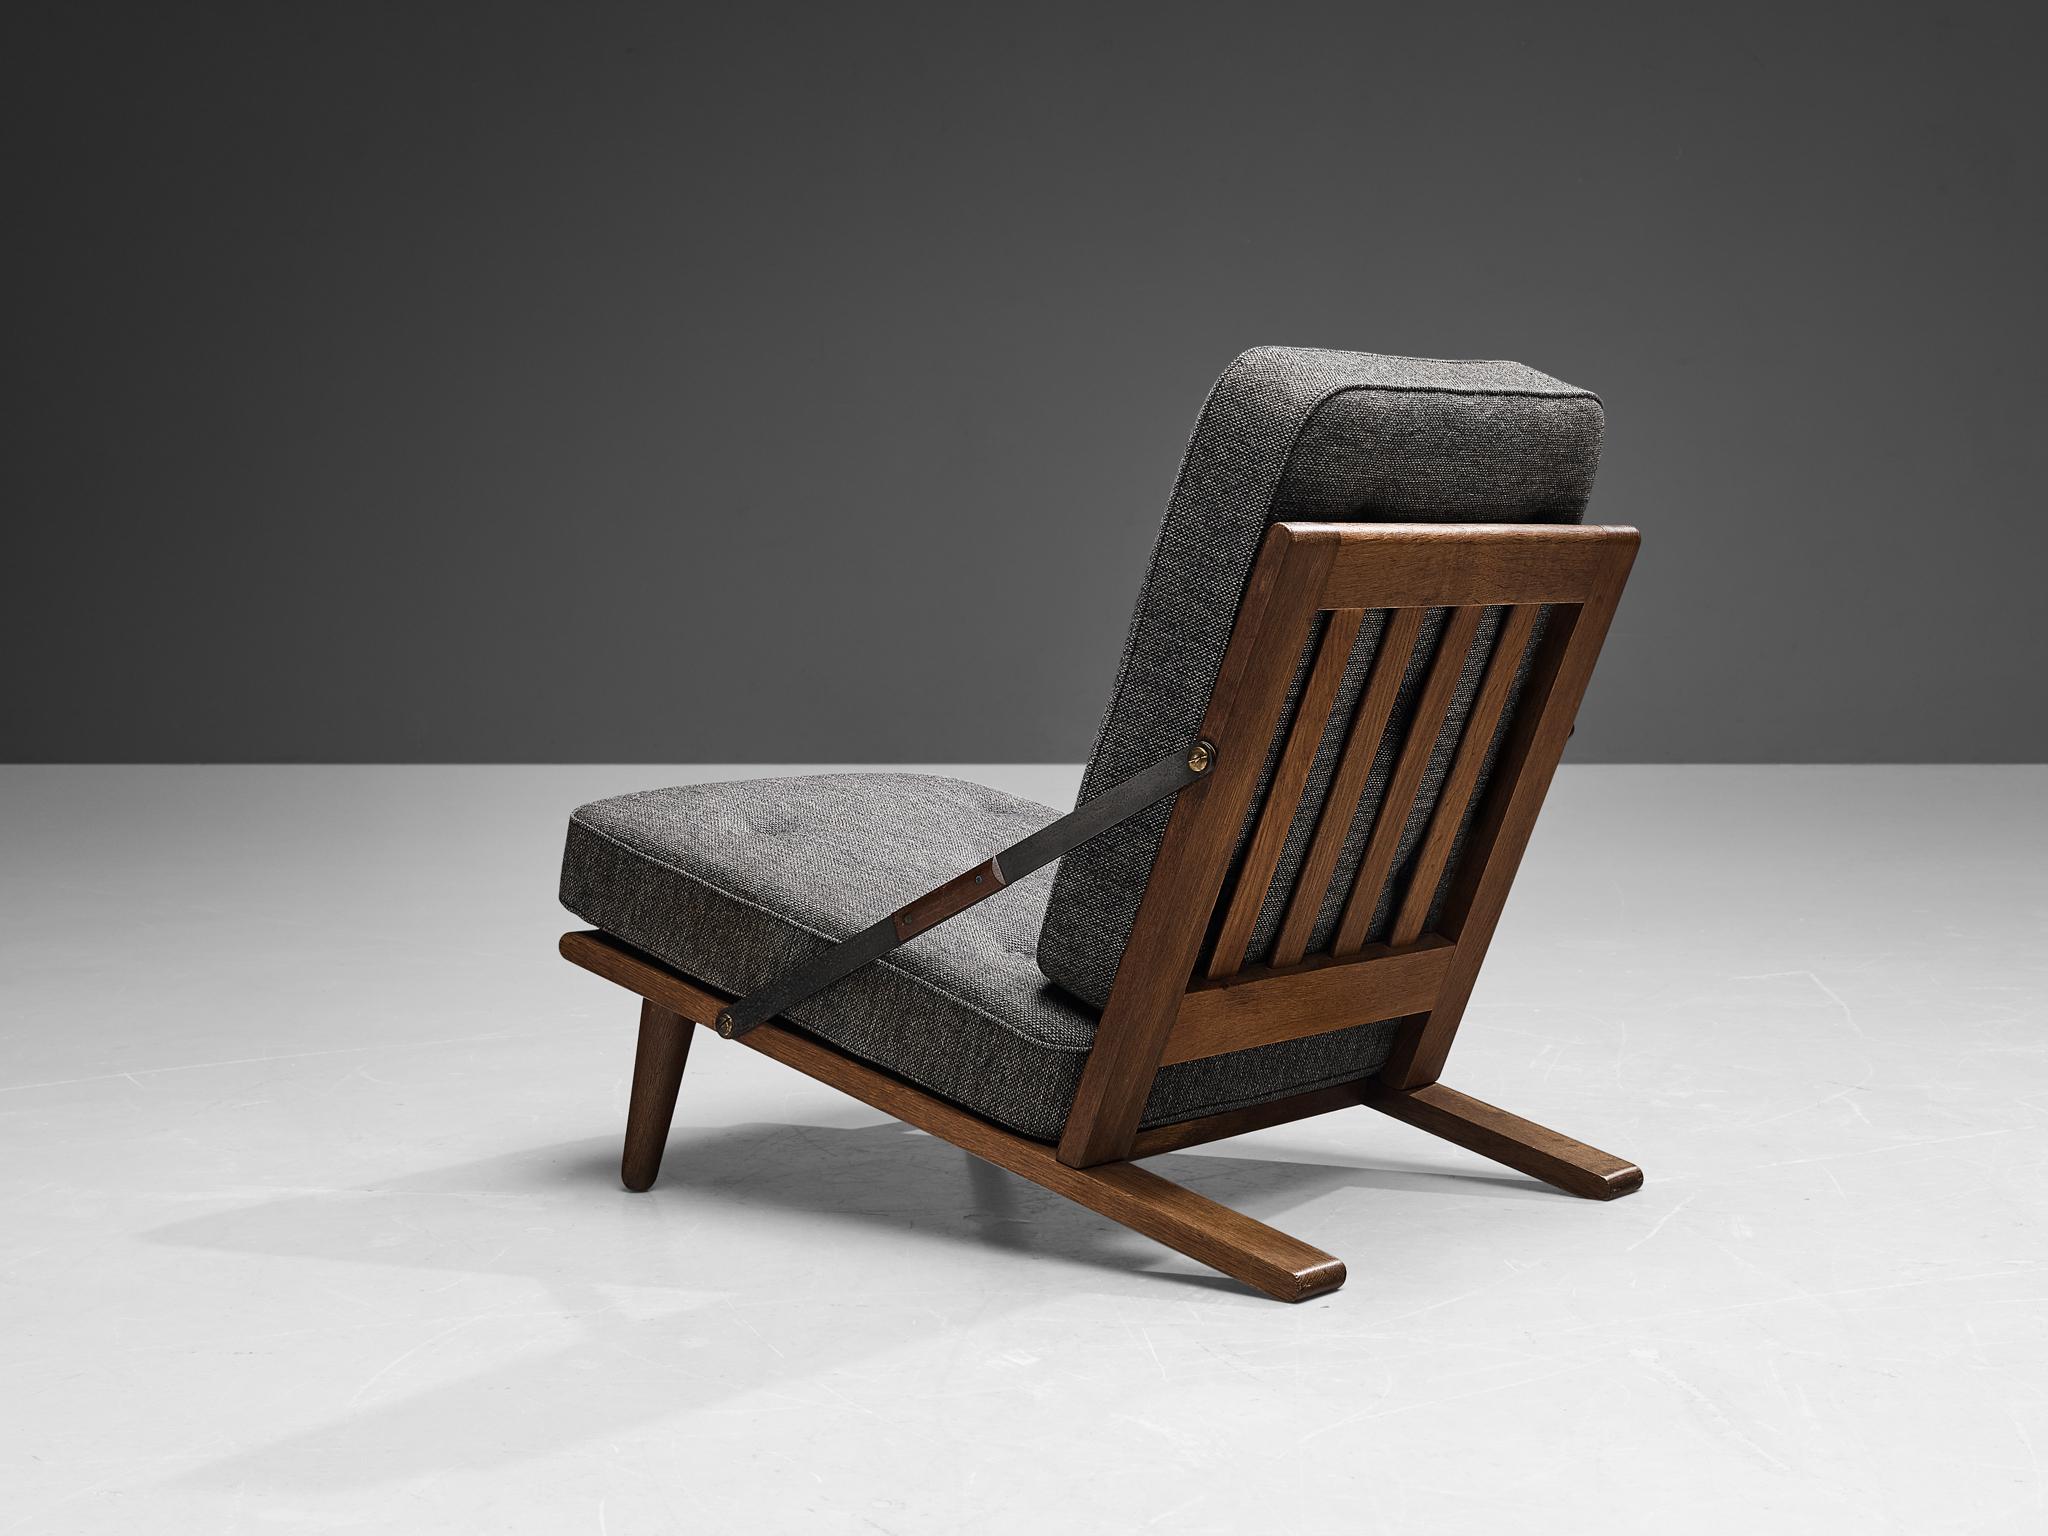 Børge Mogensen for Fredericia, hunting chair, model AG 240-11, oak, teak, metal, wool, Denmark, 1954. 

Rare hunting chair designed by one of Denmark's masters of mid-century design; Børge Mogensen. This distinctive design has a very strong